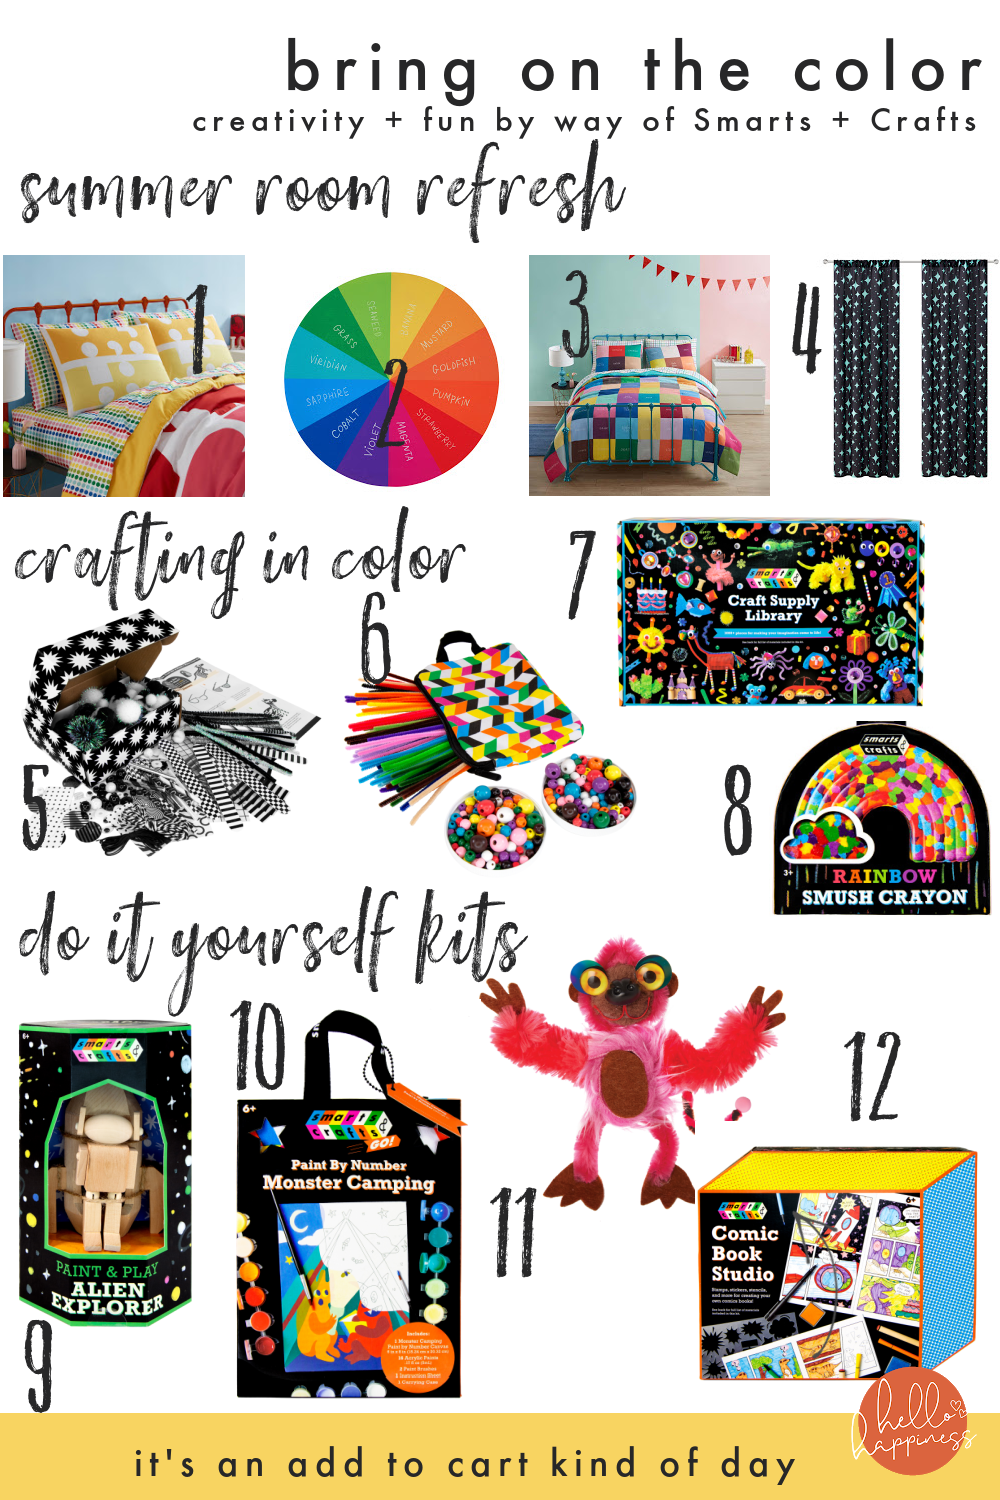 Smarts and Crafts by popular Nashville lifestyle blog, Hello Happiness: collage image of Smarts and Crafts multi color sheet set, decorative wall art, color block comforter set, magical sparkle window panels, black and white kit, Fuzzy sticks and wooden beads, rainbow smush crayon, craft supply library, make your own alien, Monster paint by numbers, monster craft kit, and comic book studio. 